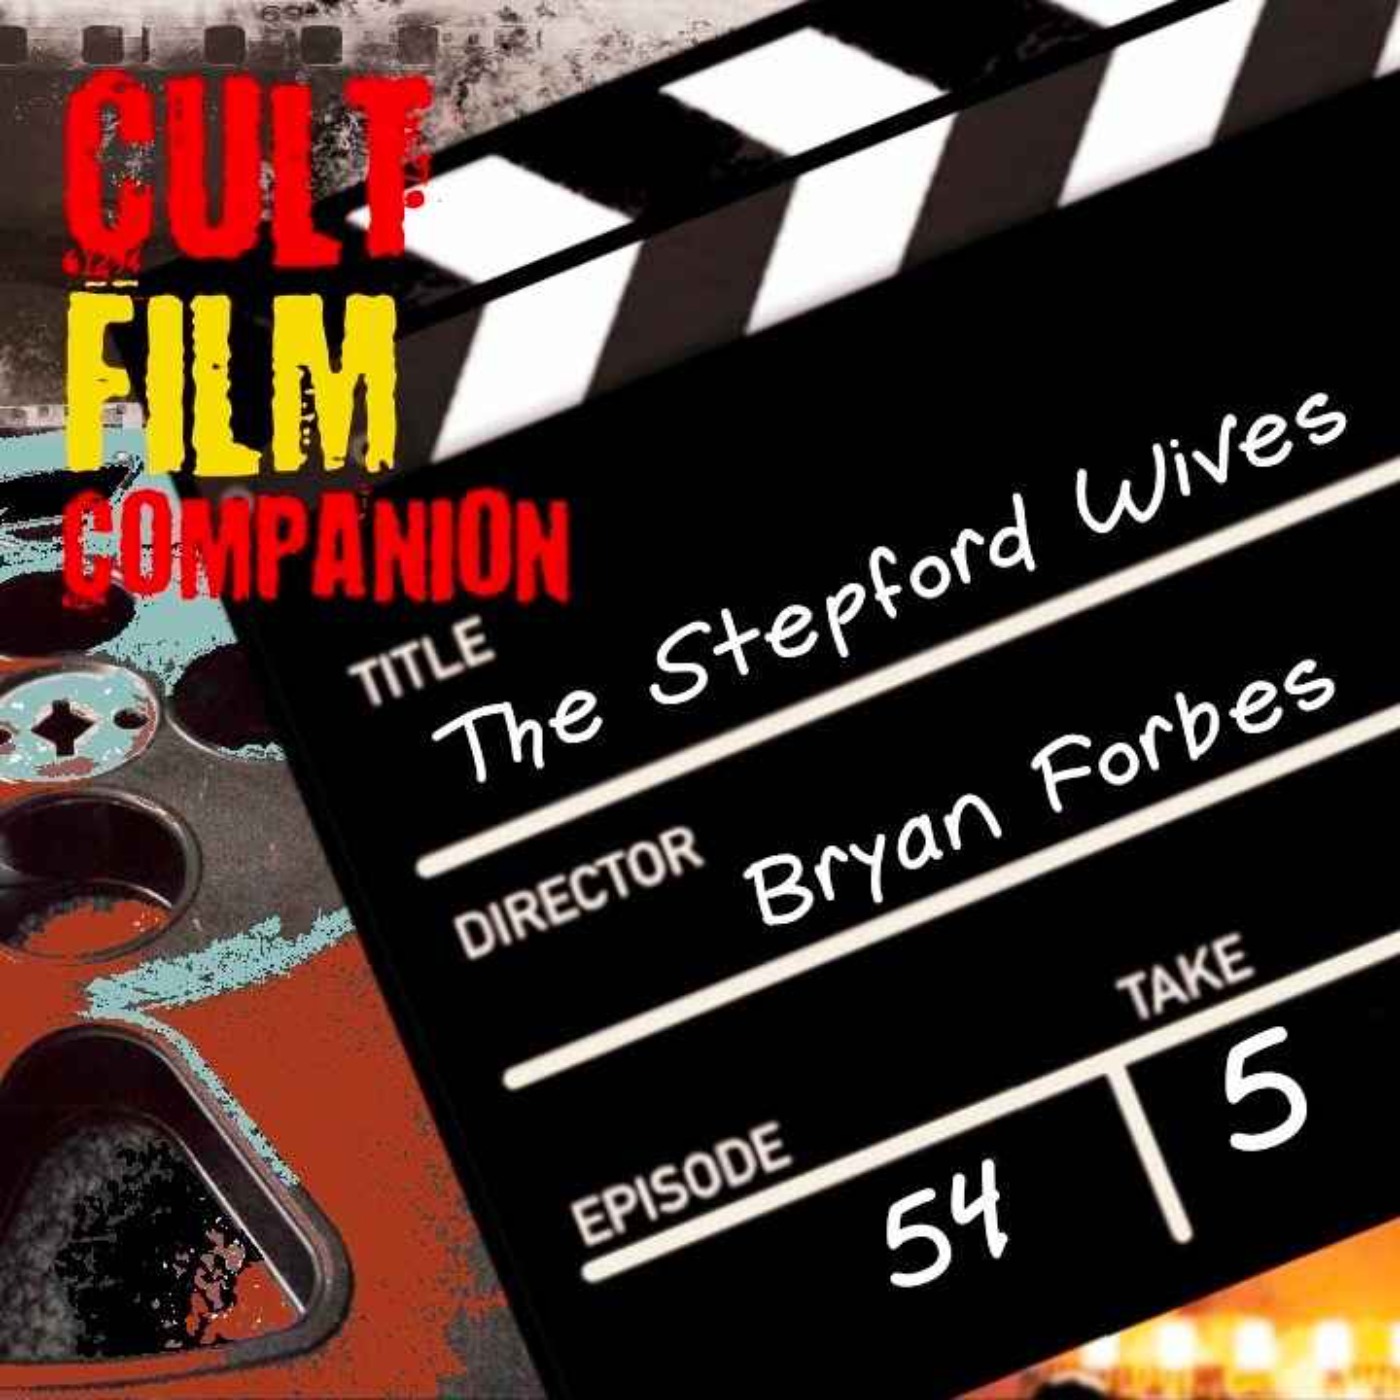 Ep. 54 The Stepford Wives directed by Bryan Forbes